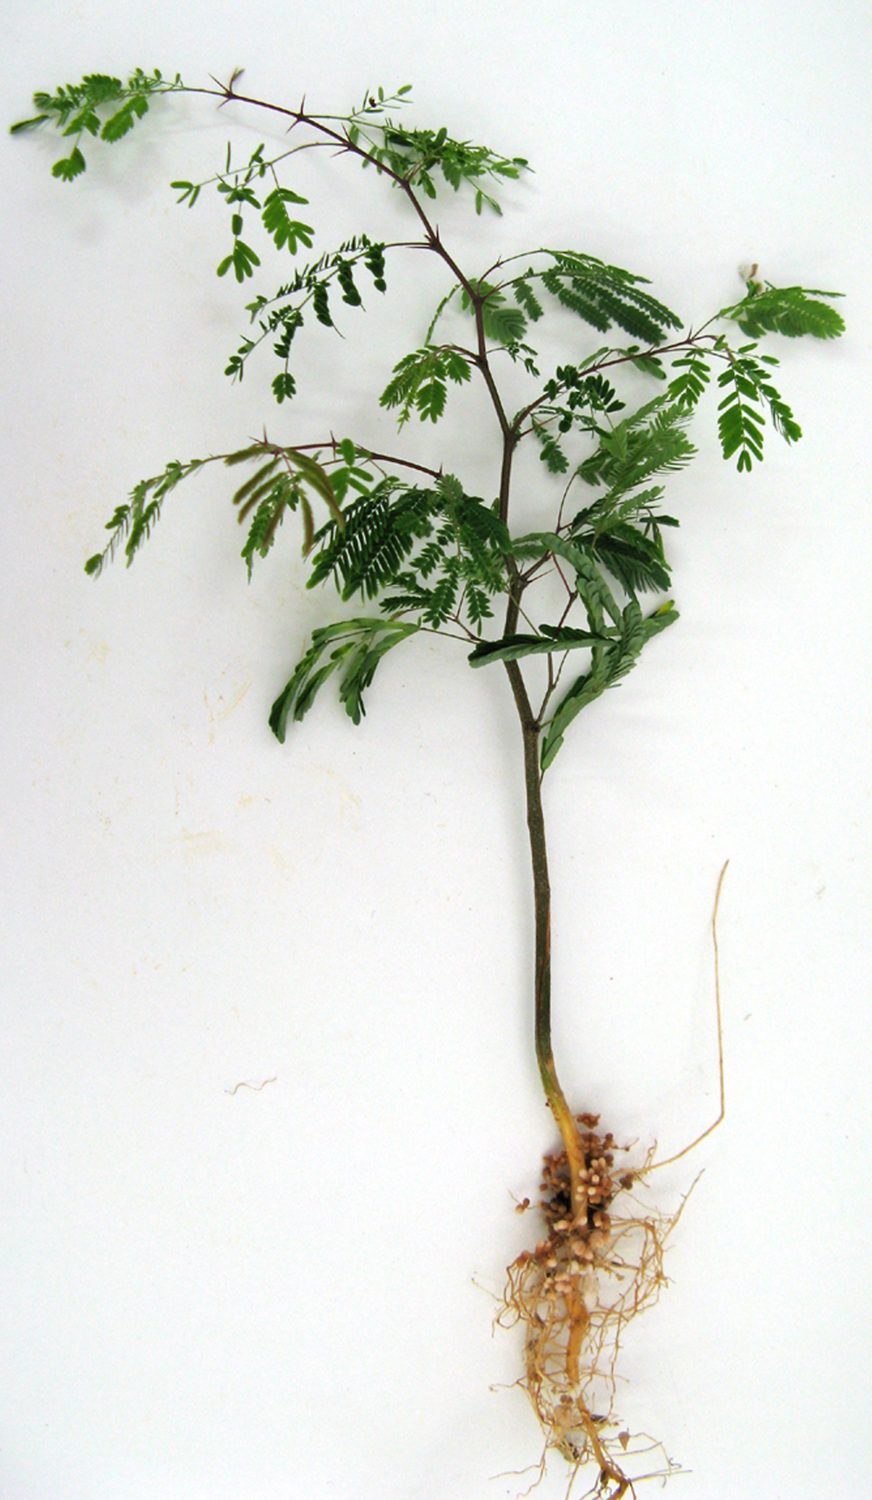 A roughly two-foot tall leafy plant with its roots still attached, against a white background.